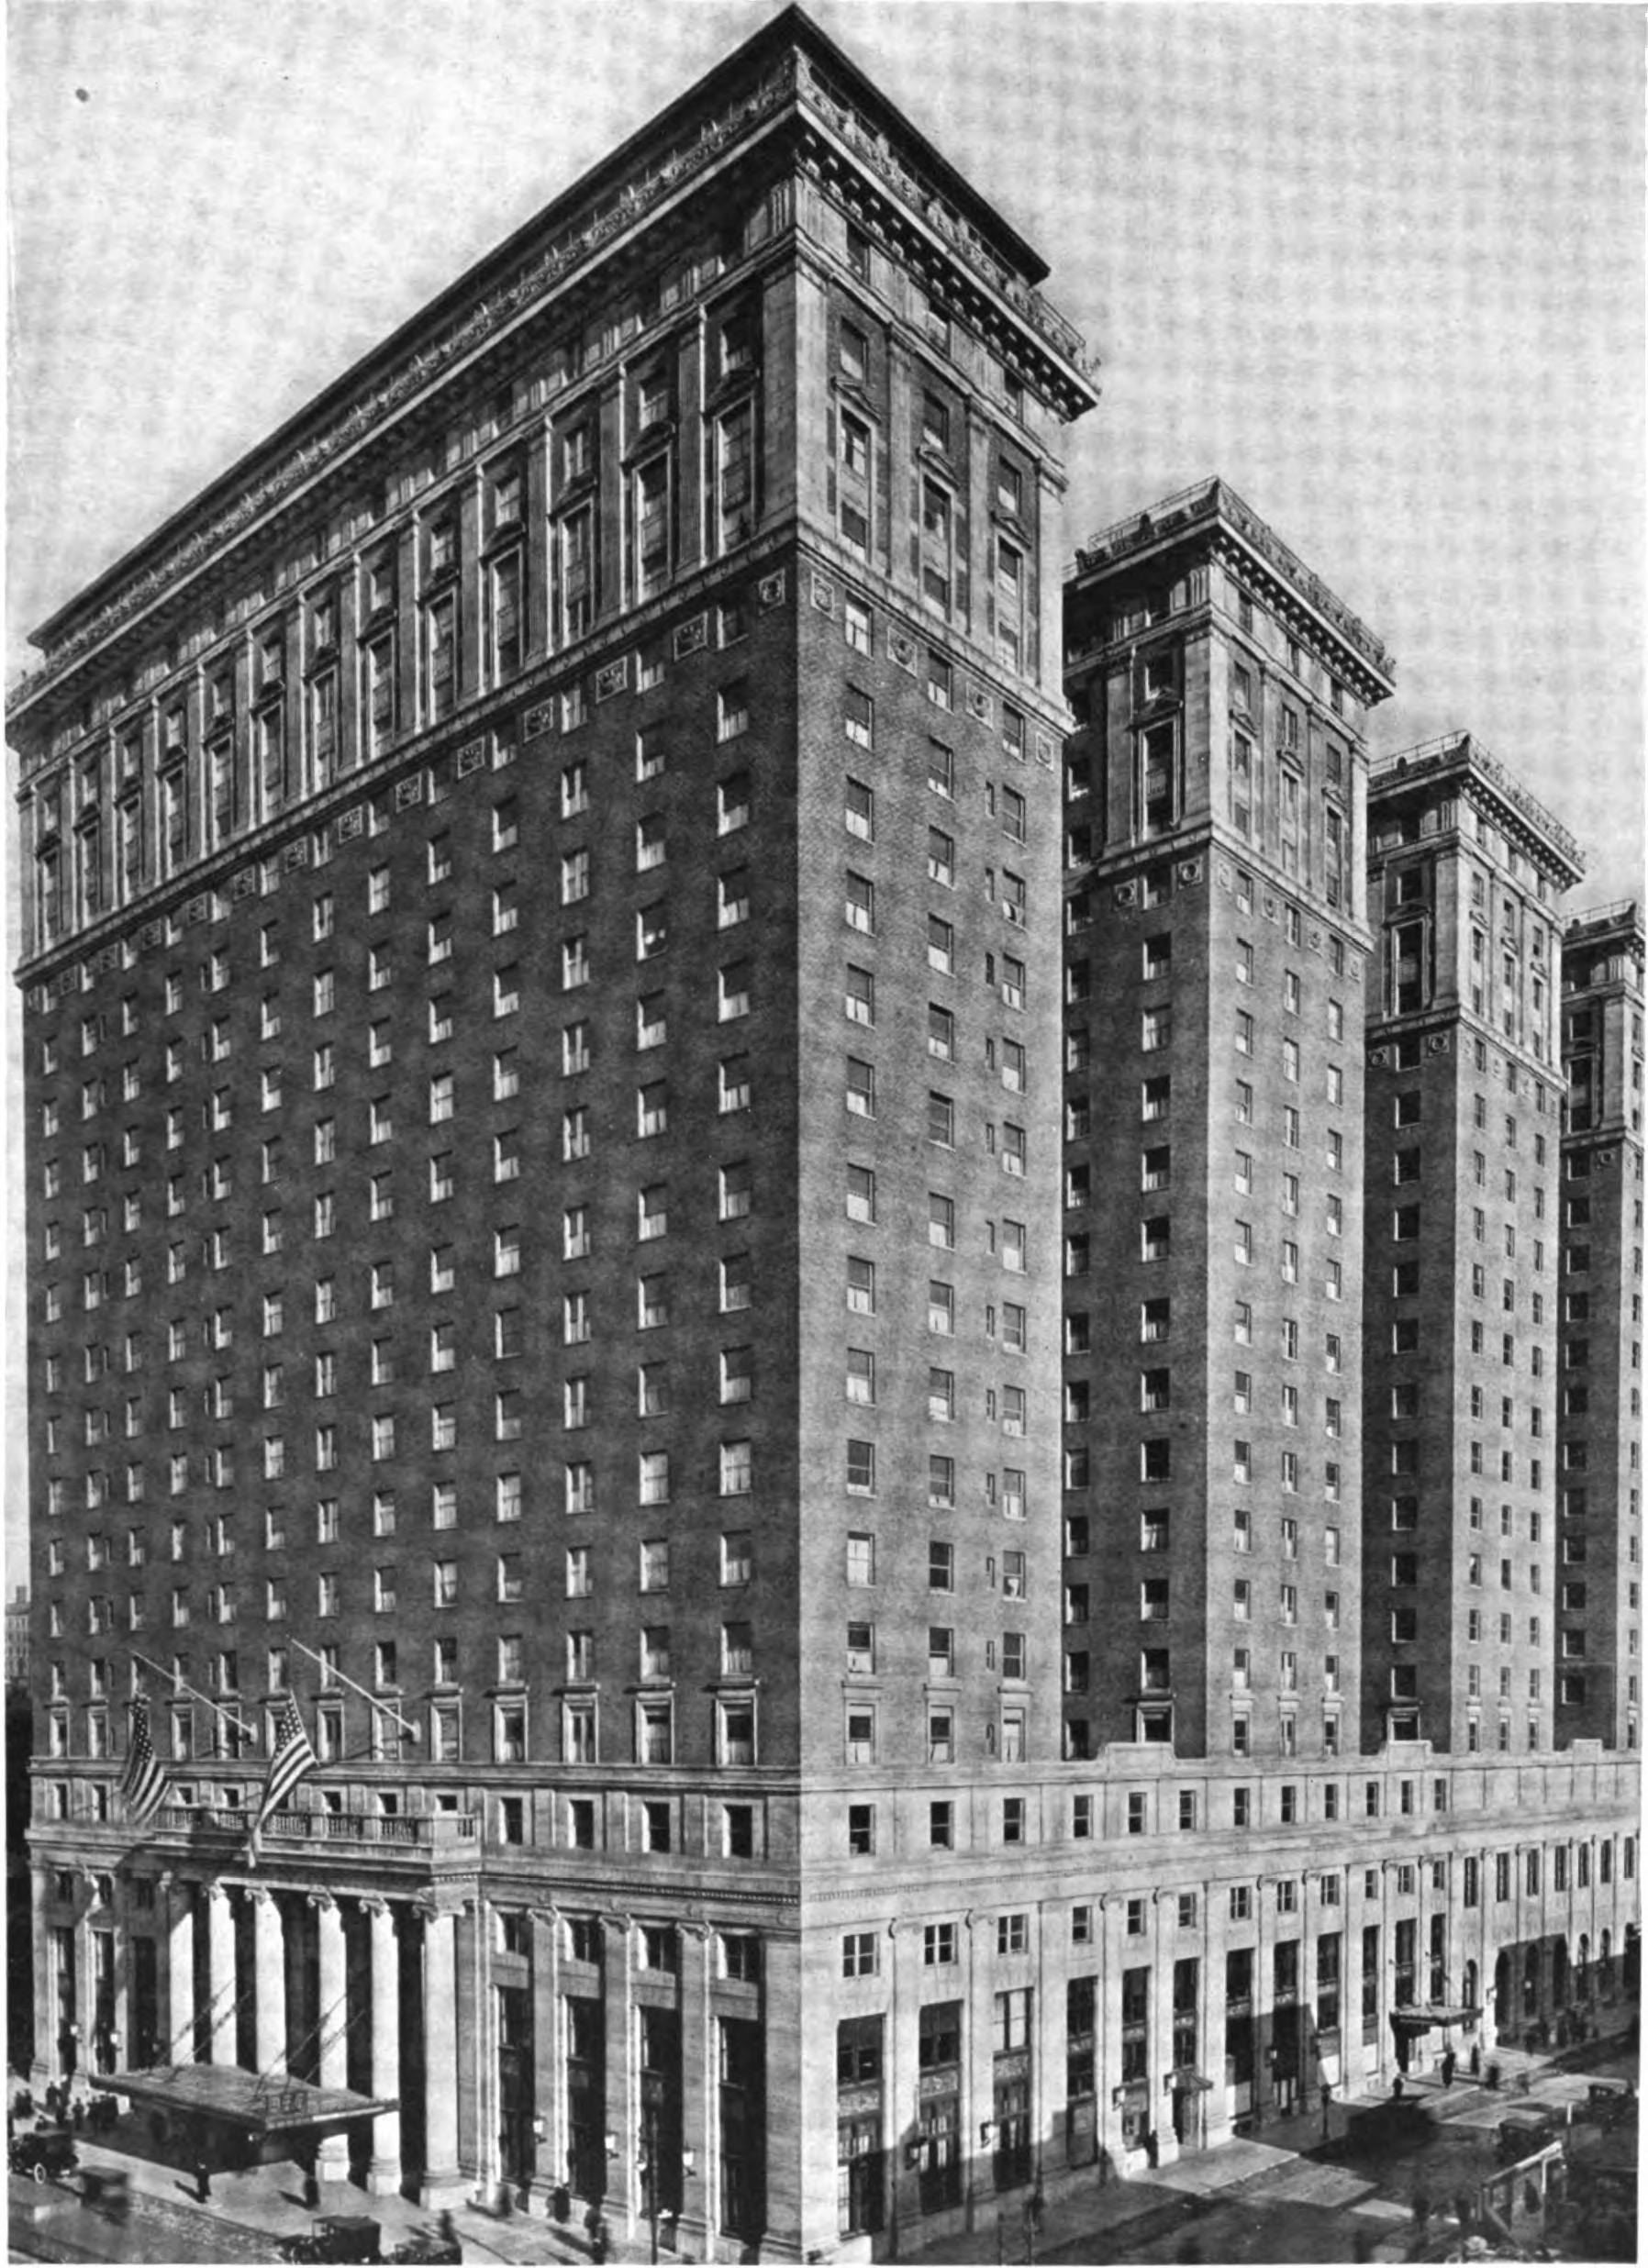 Frank plunged to his death from Hotel Statler in New York